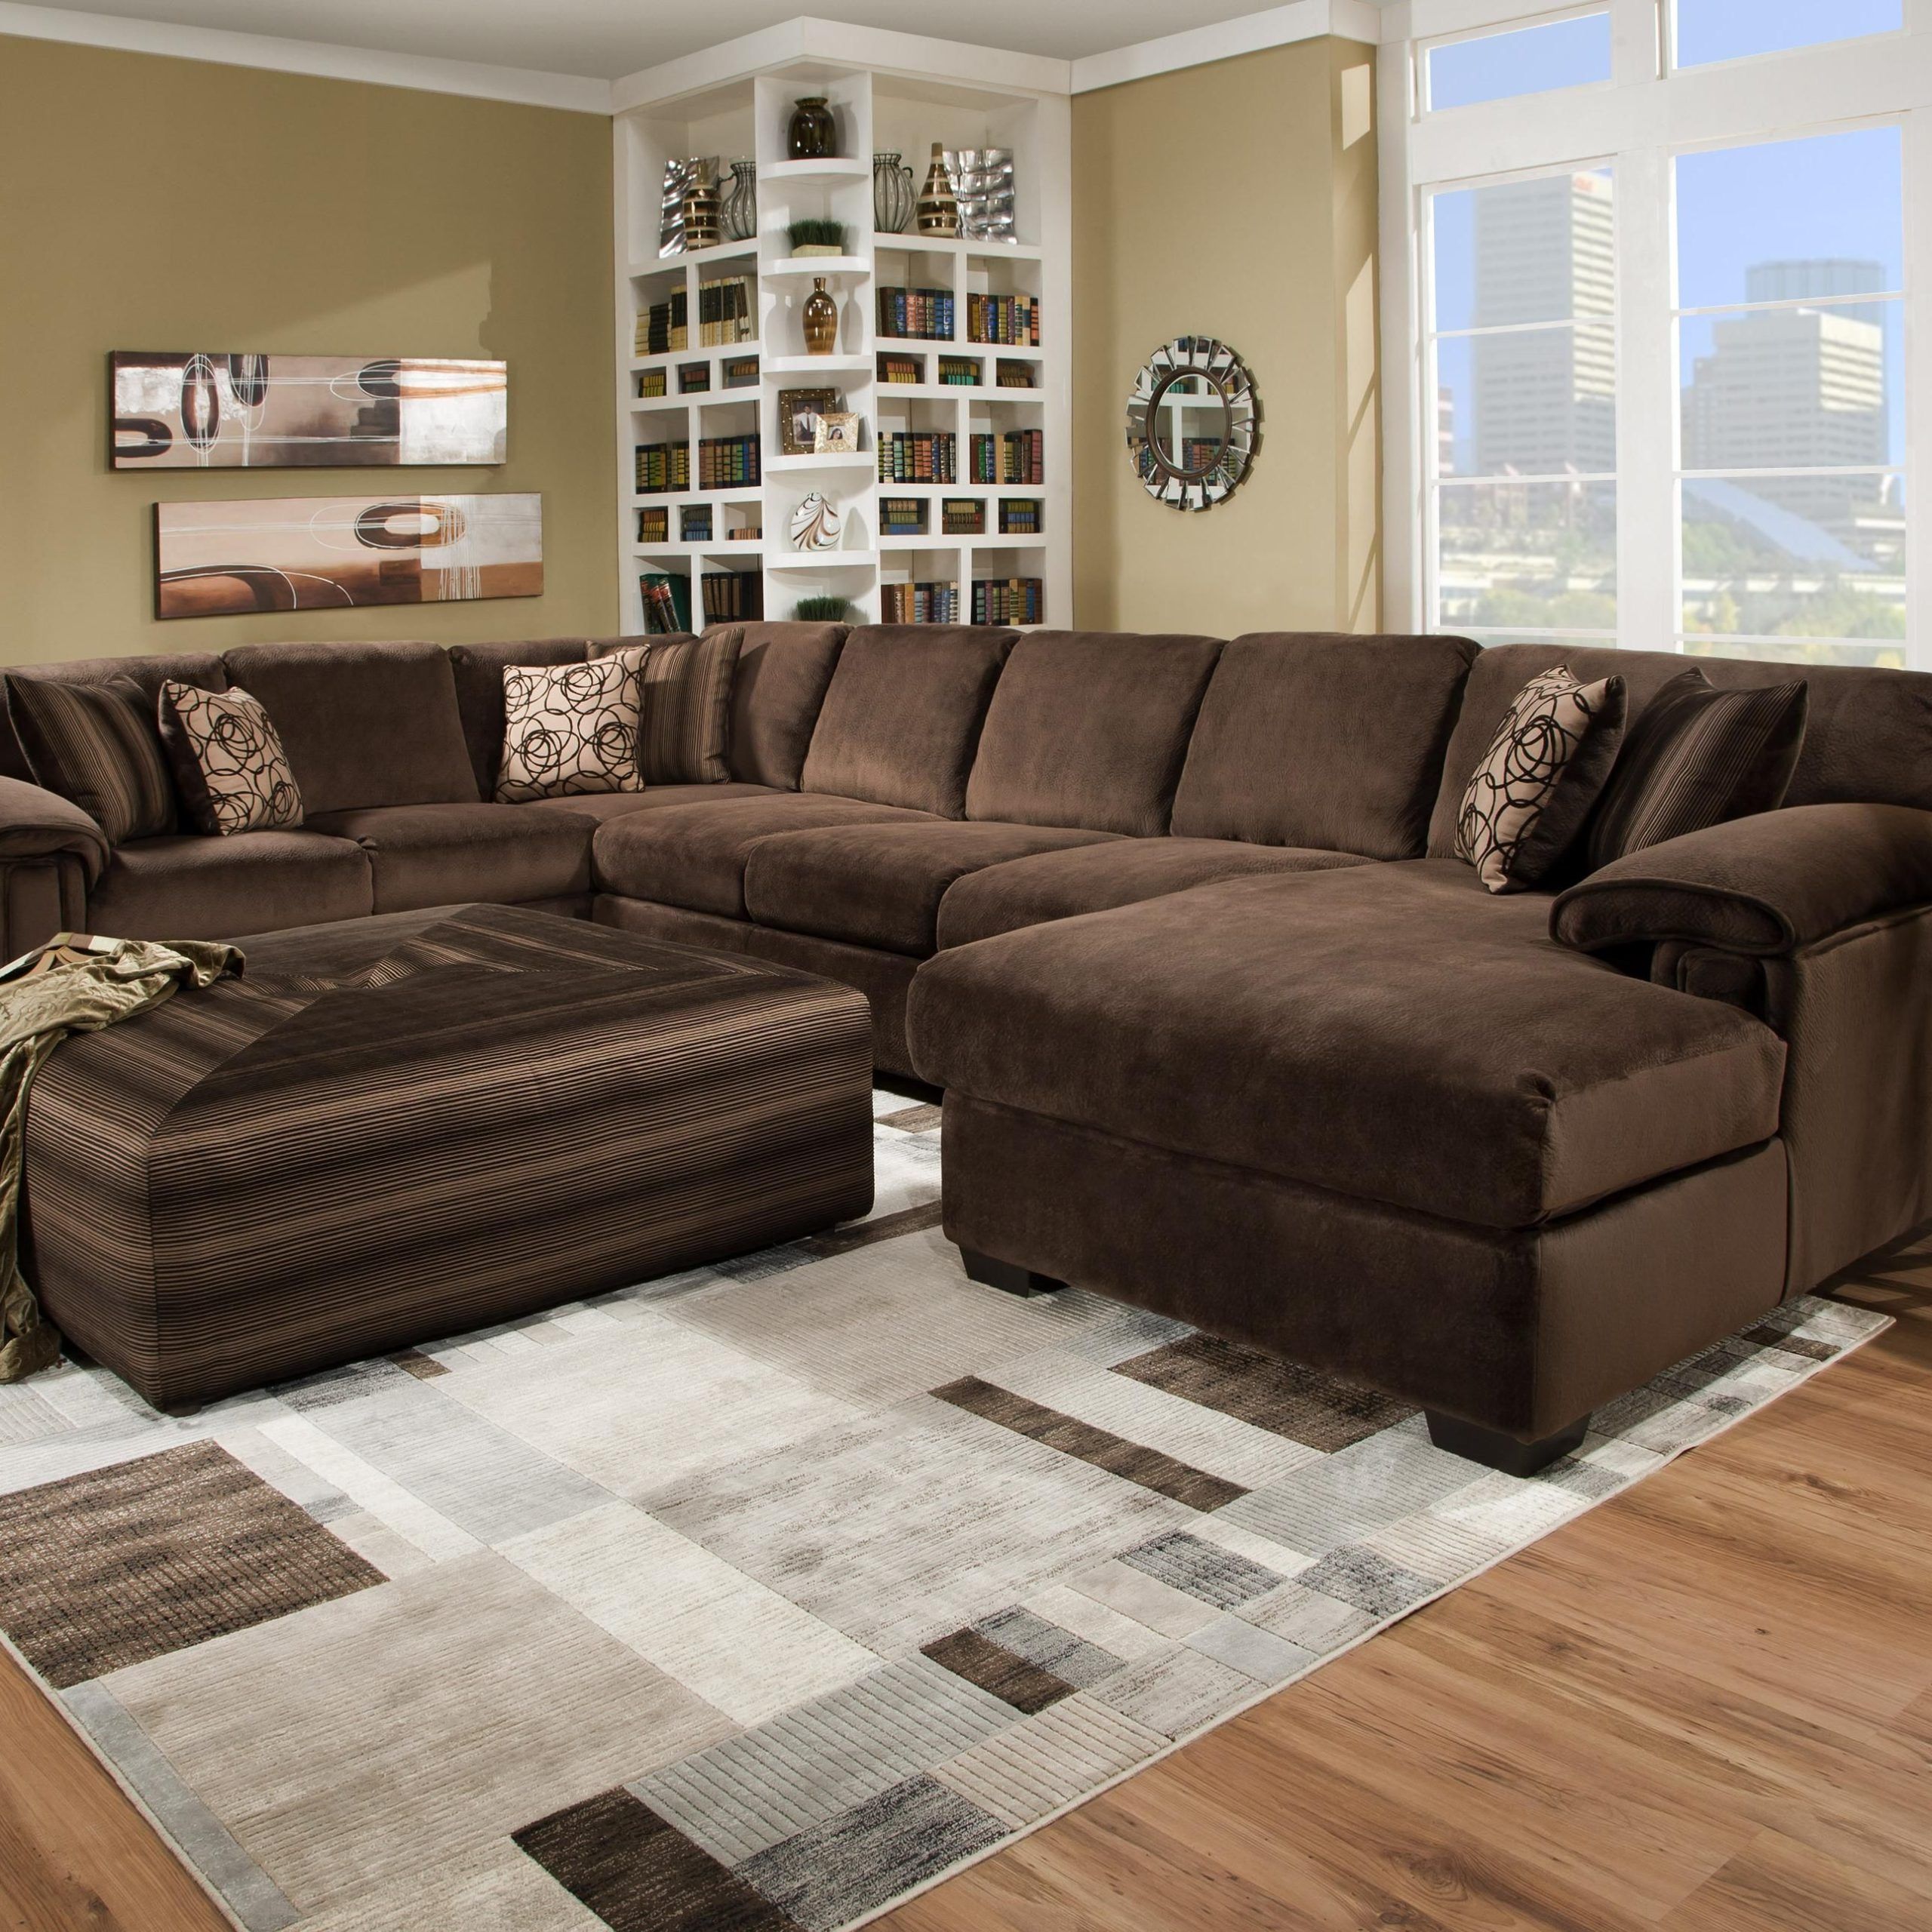 Newest Sofas With Ottomans In Brown Intended For Chocolate Brown Velvet Sectional Sofa (View 9 of 15)